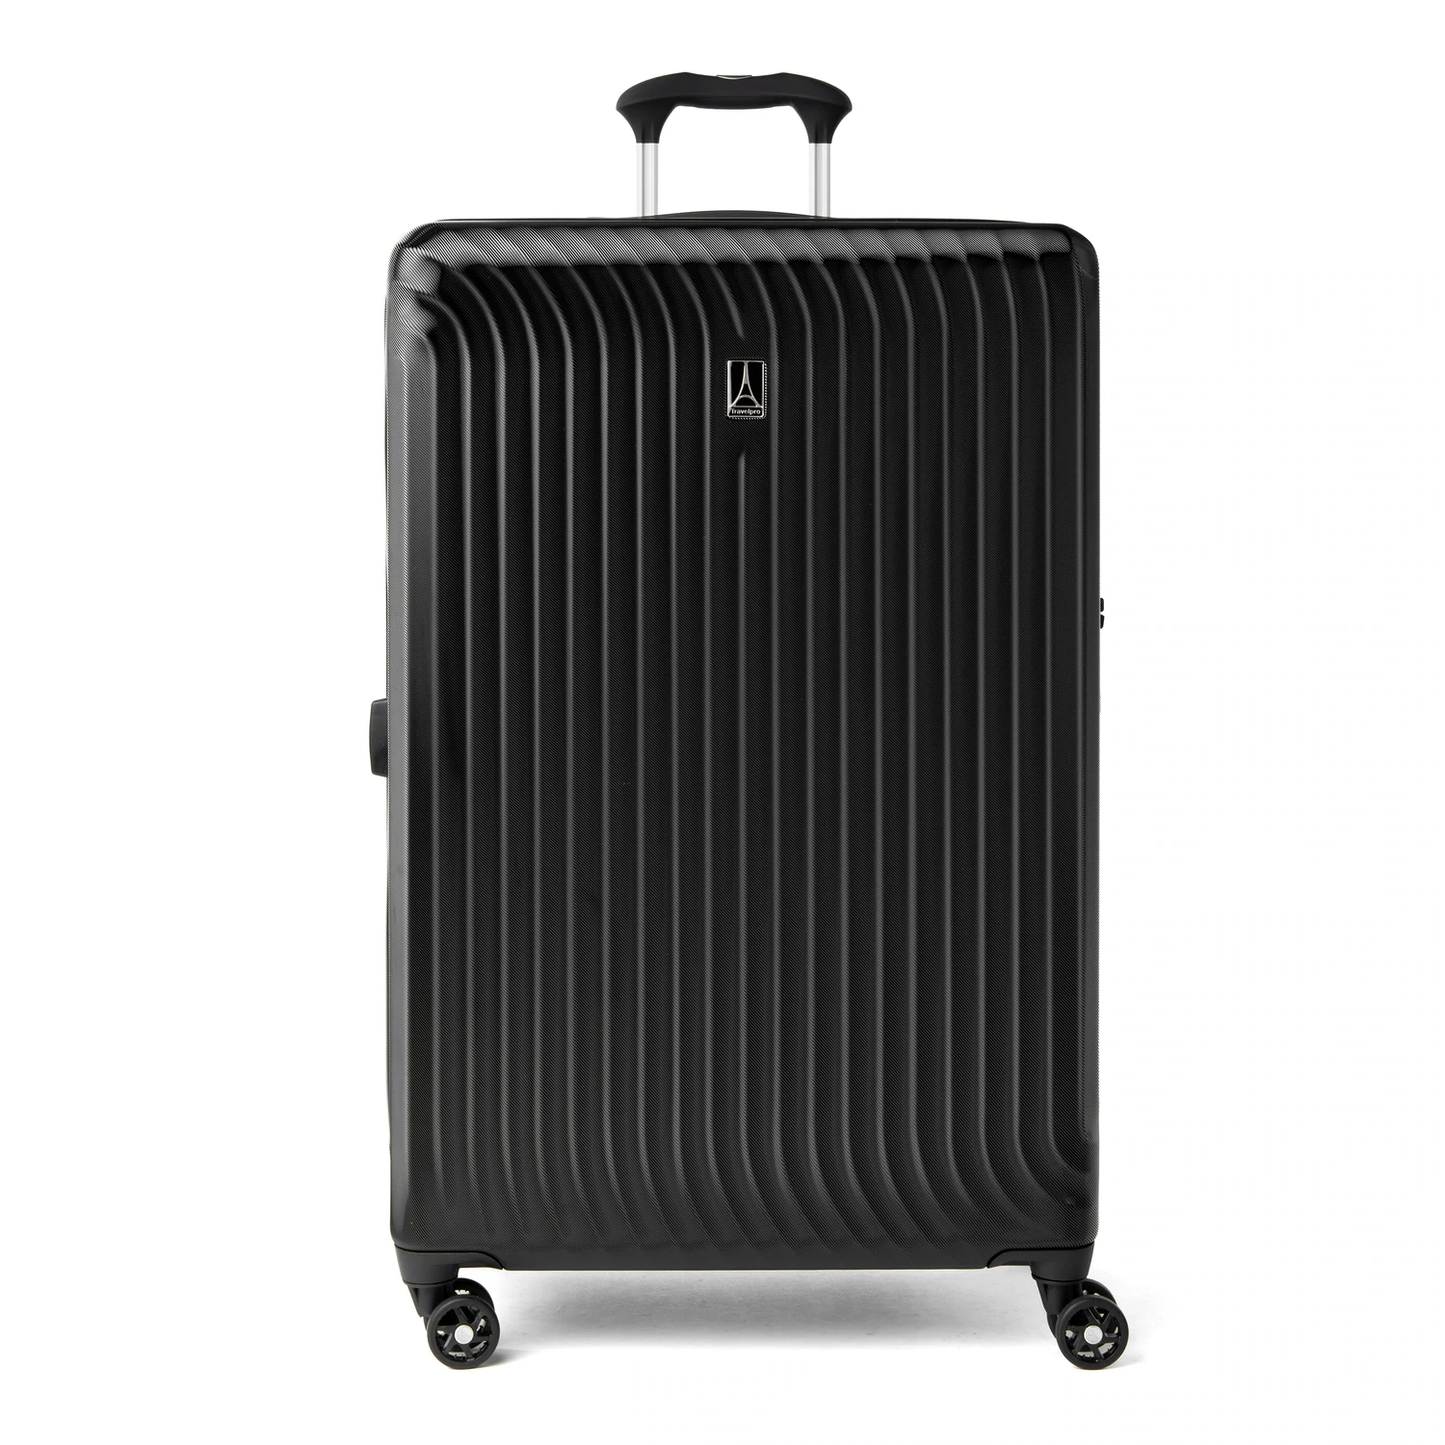 Travelpro Maxlite Air Hardside Luggage (LARGE) (30%OFF IN STORE)